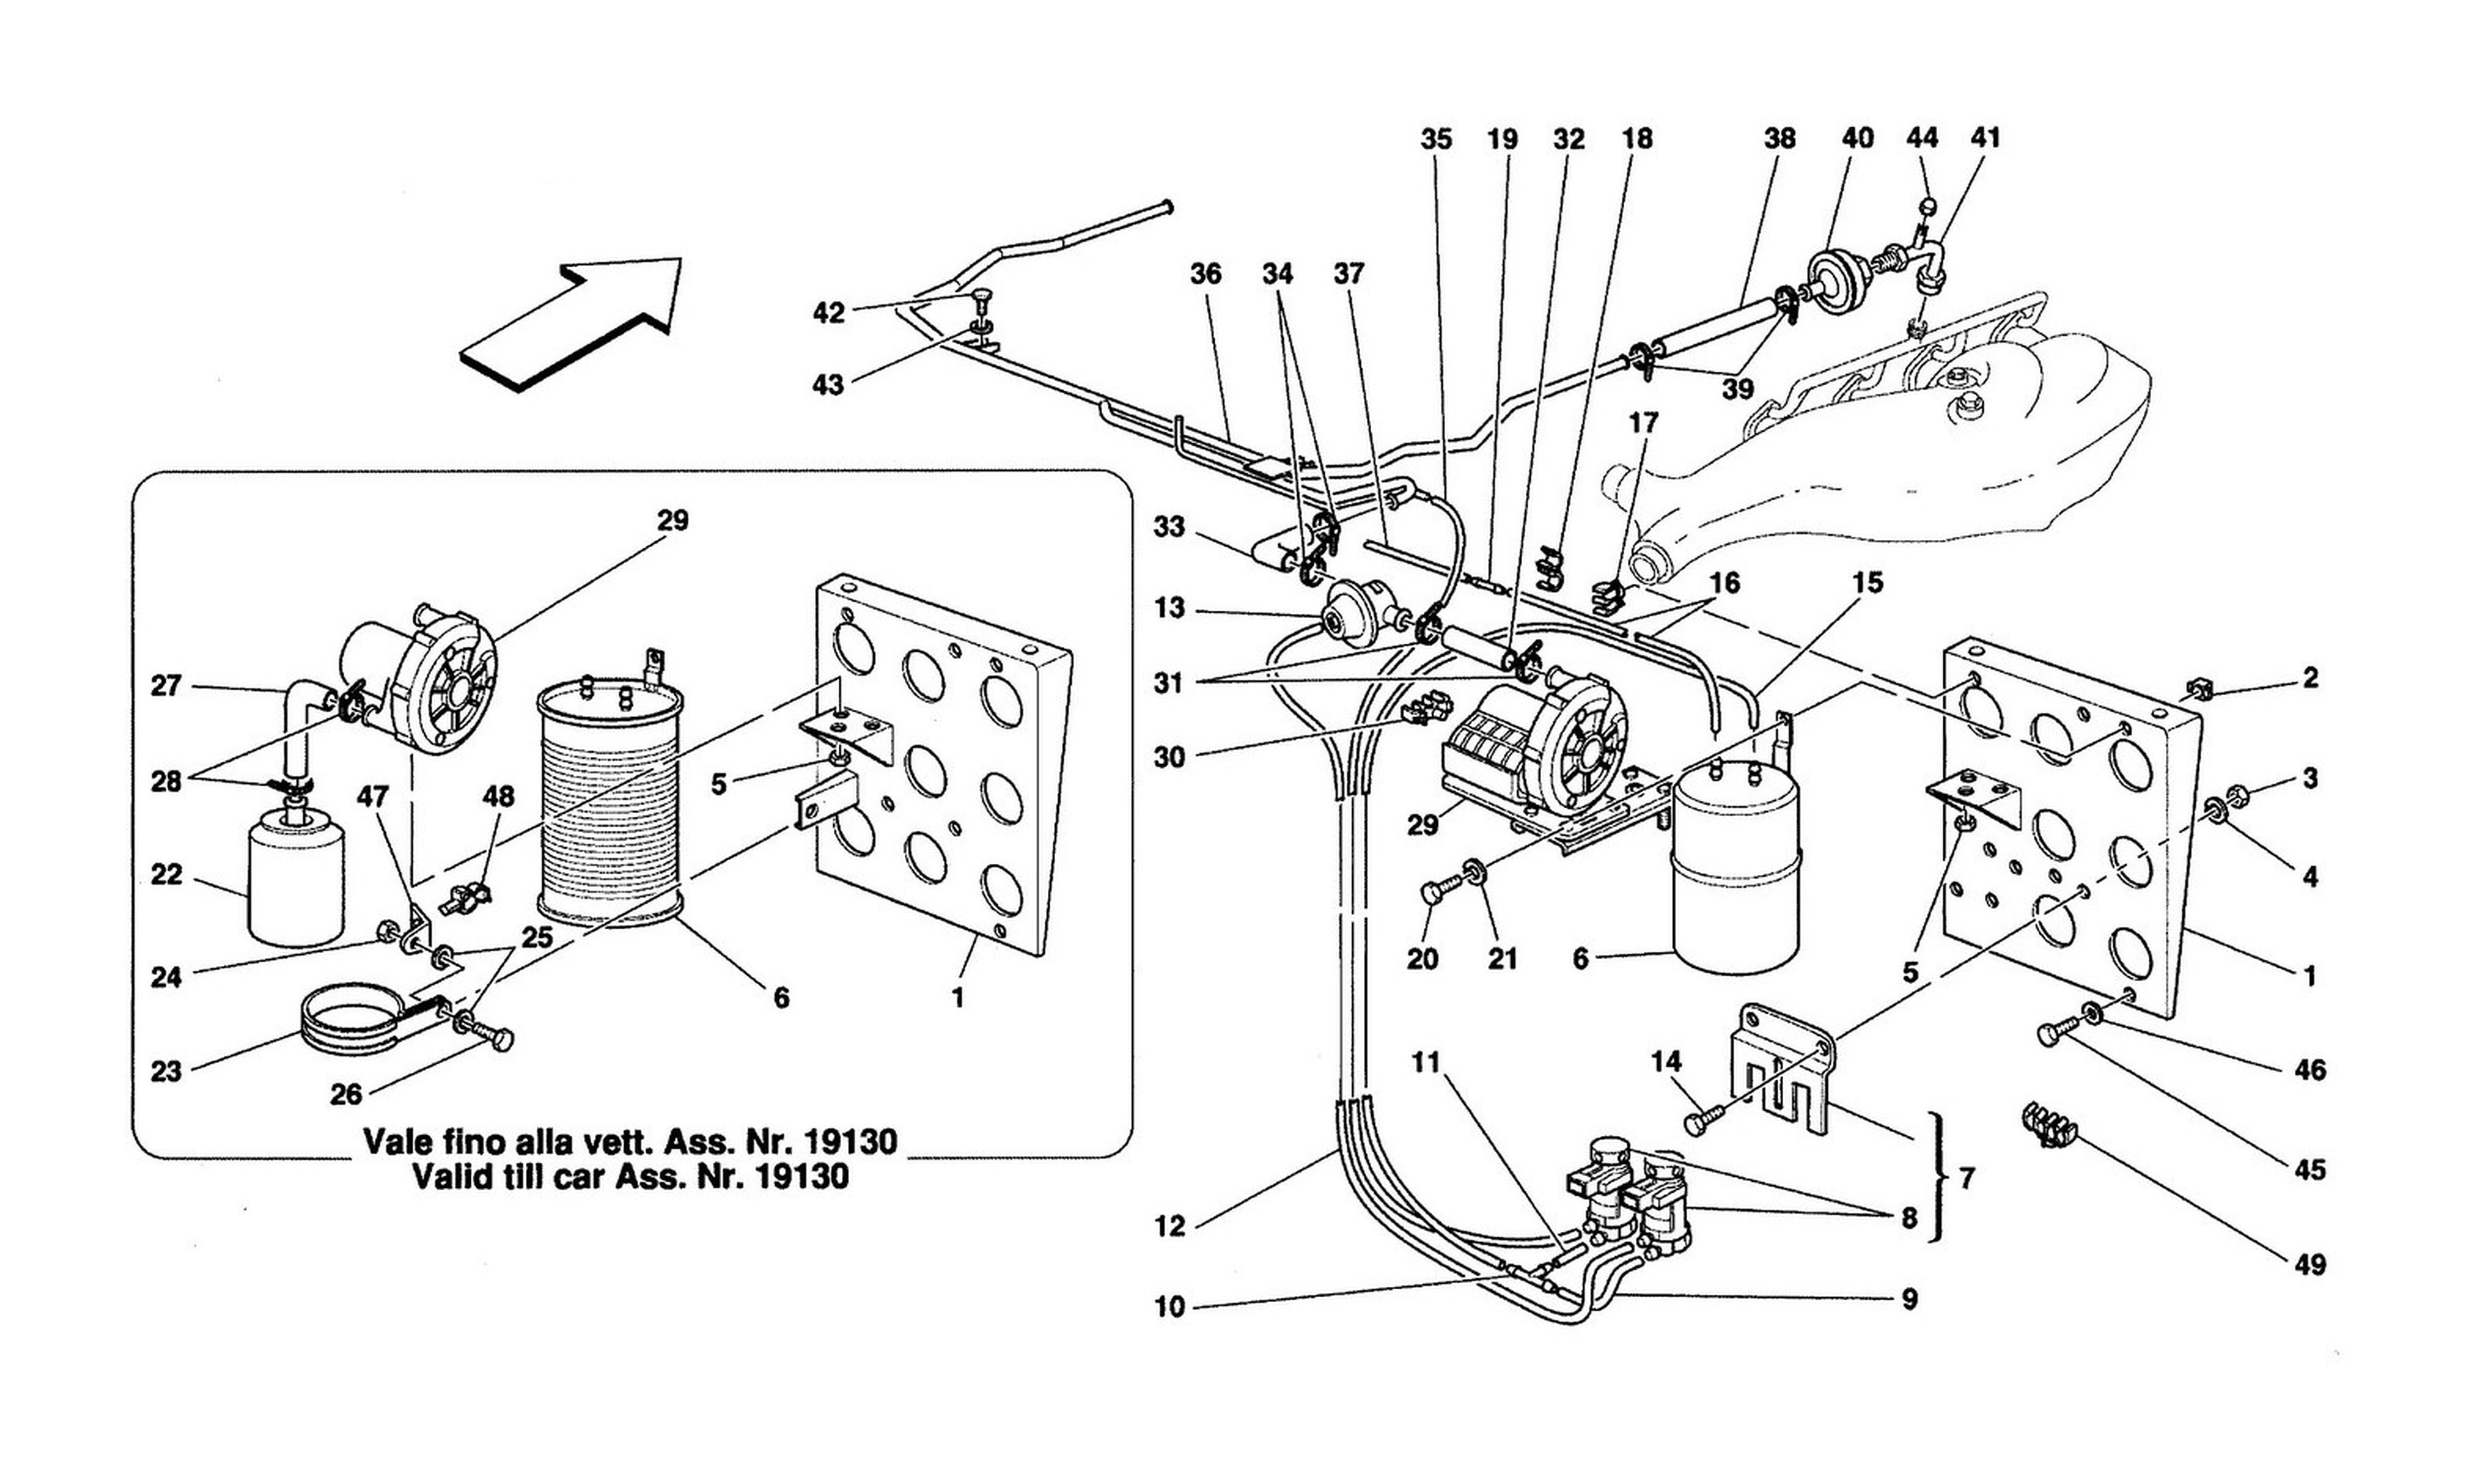 Schematic: Air Injection Device